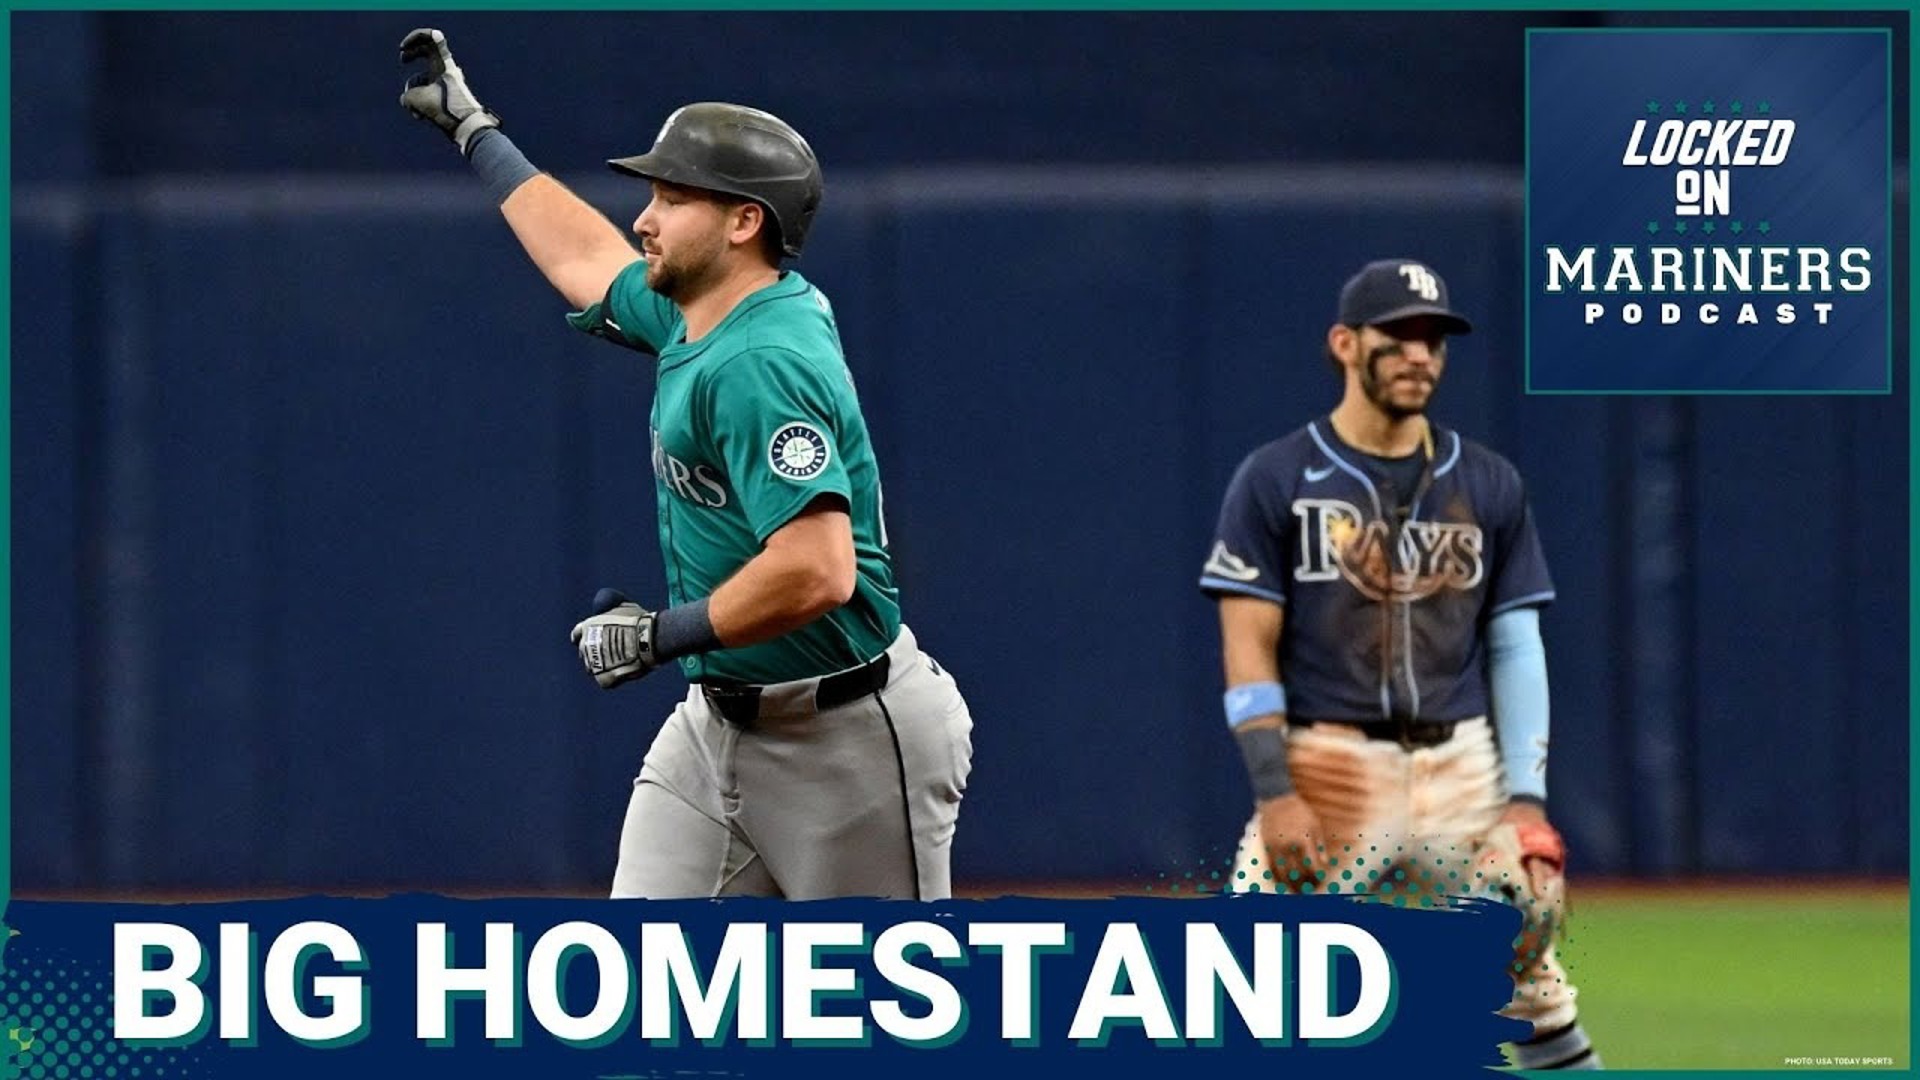 The Mariners are back home following a terrible 3-6 road trip, but things don't get much easier as the Twins, Orioles, and Blue Jays await them.